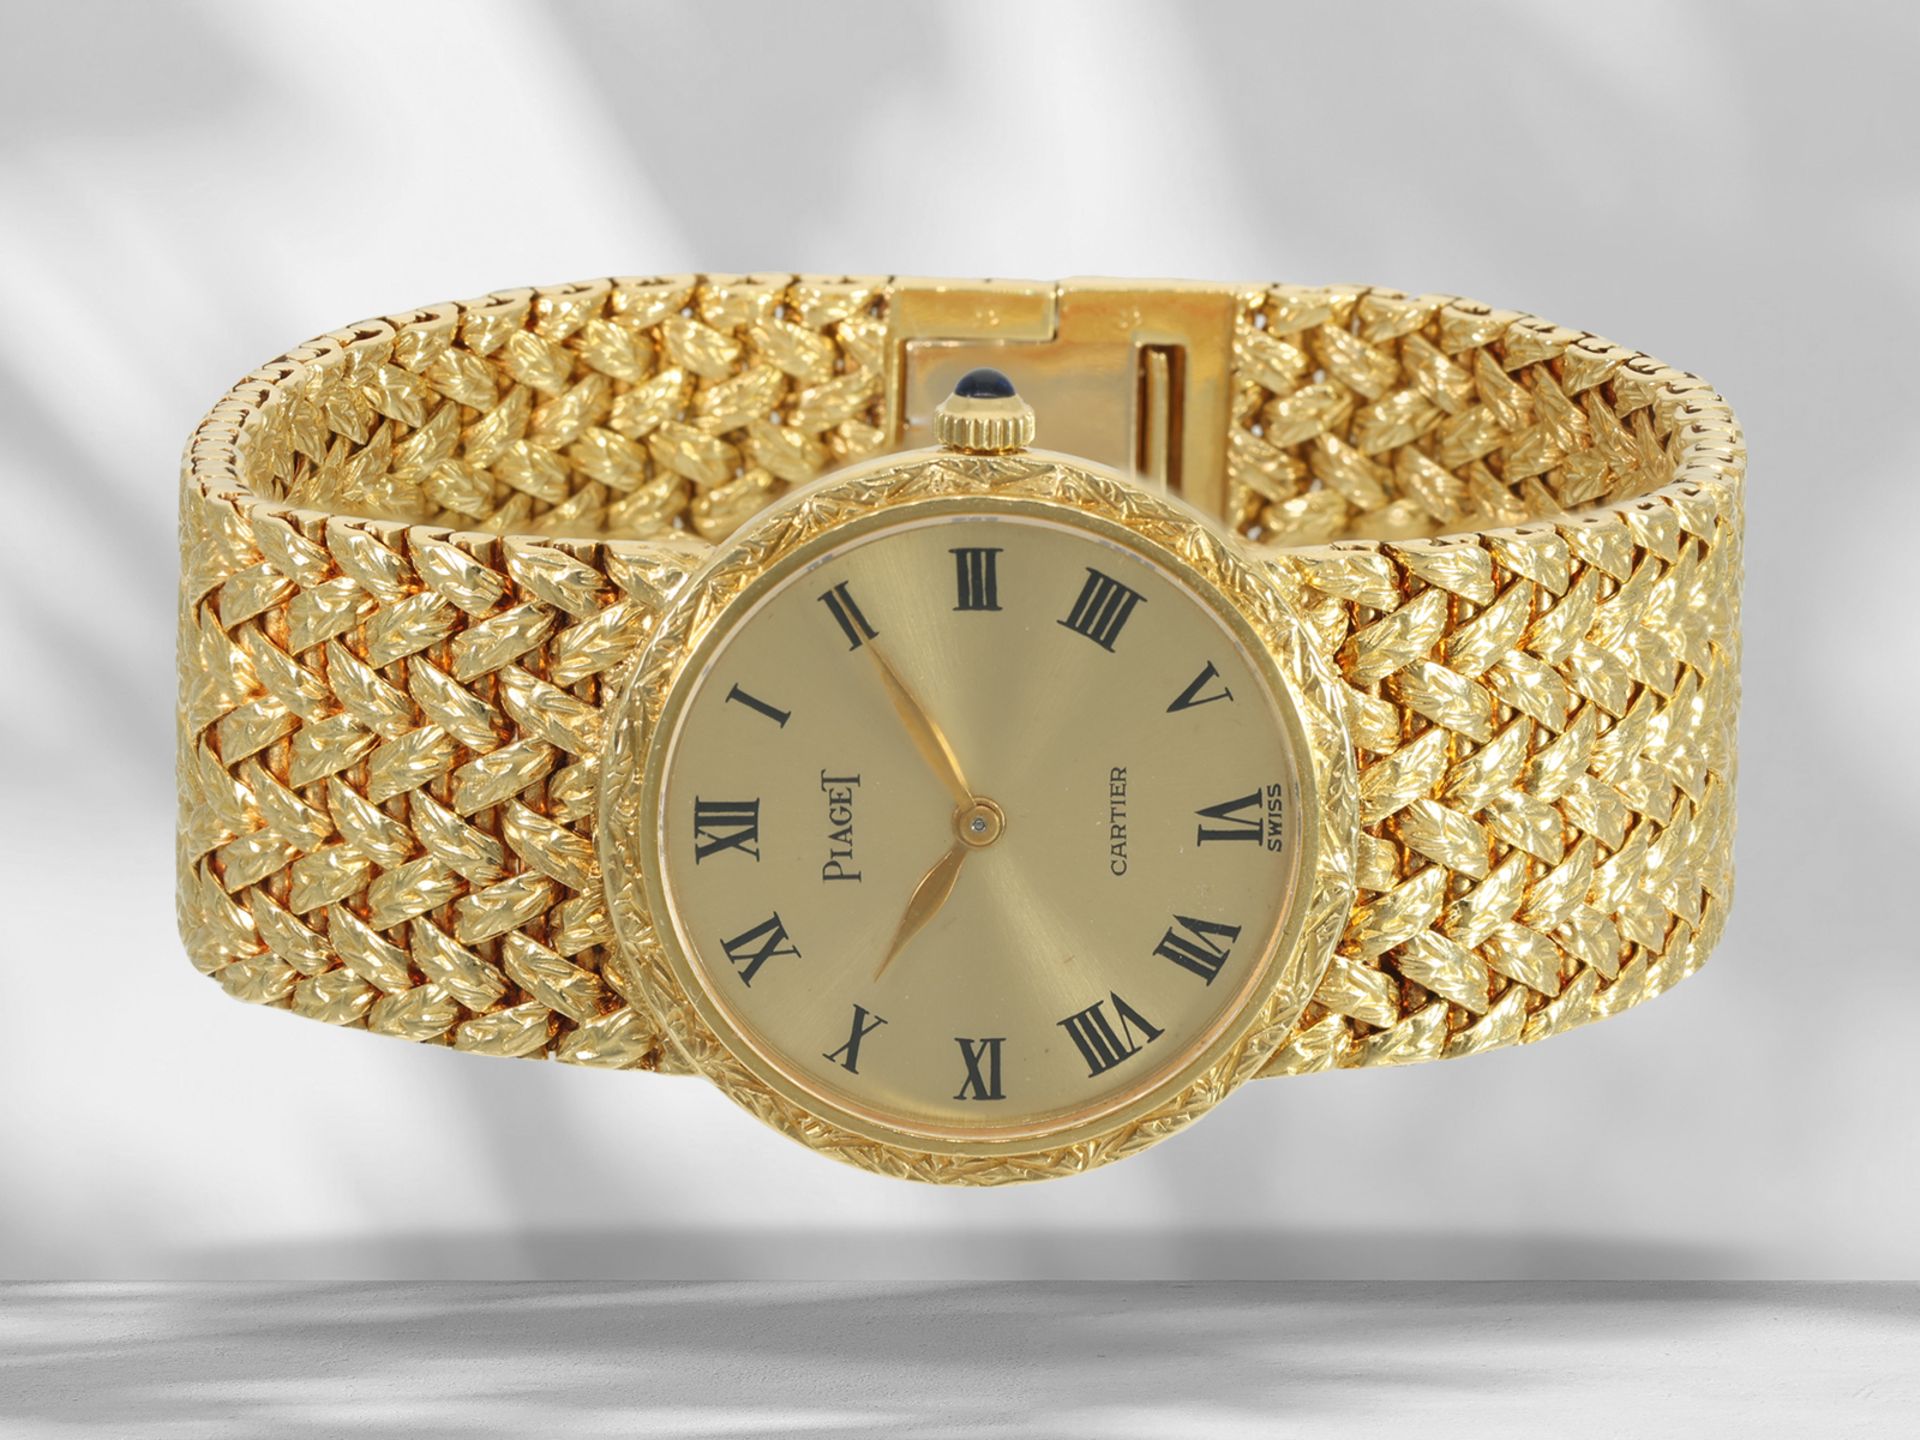 Wristwatch: like new, luxurious and very thin ladies' watch by Piaget/Cartier, Ref: 924 D 2, 18K gol - Image 2 of 4